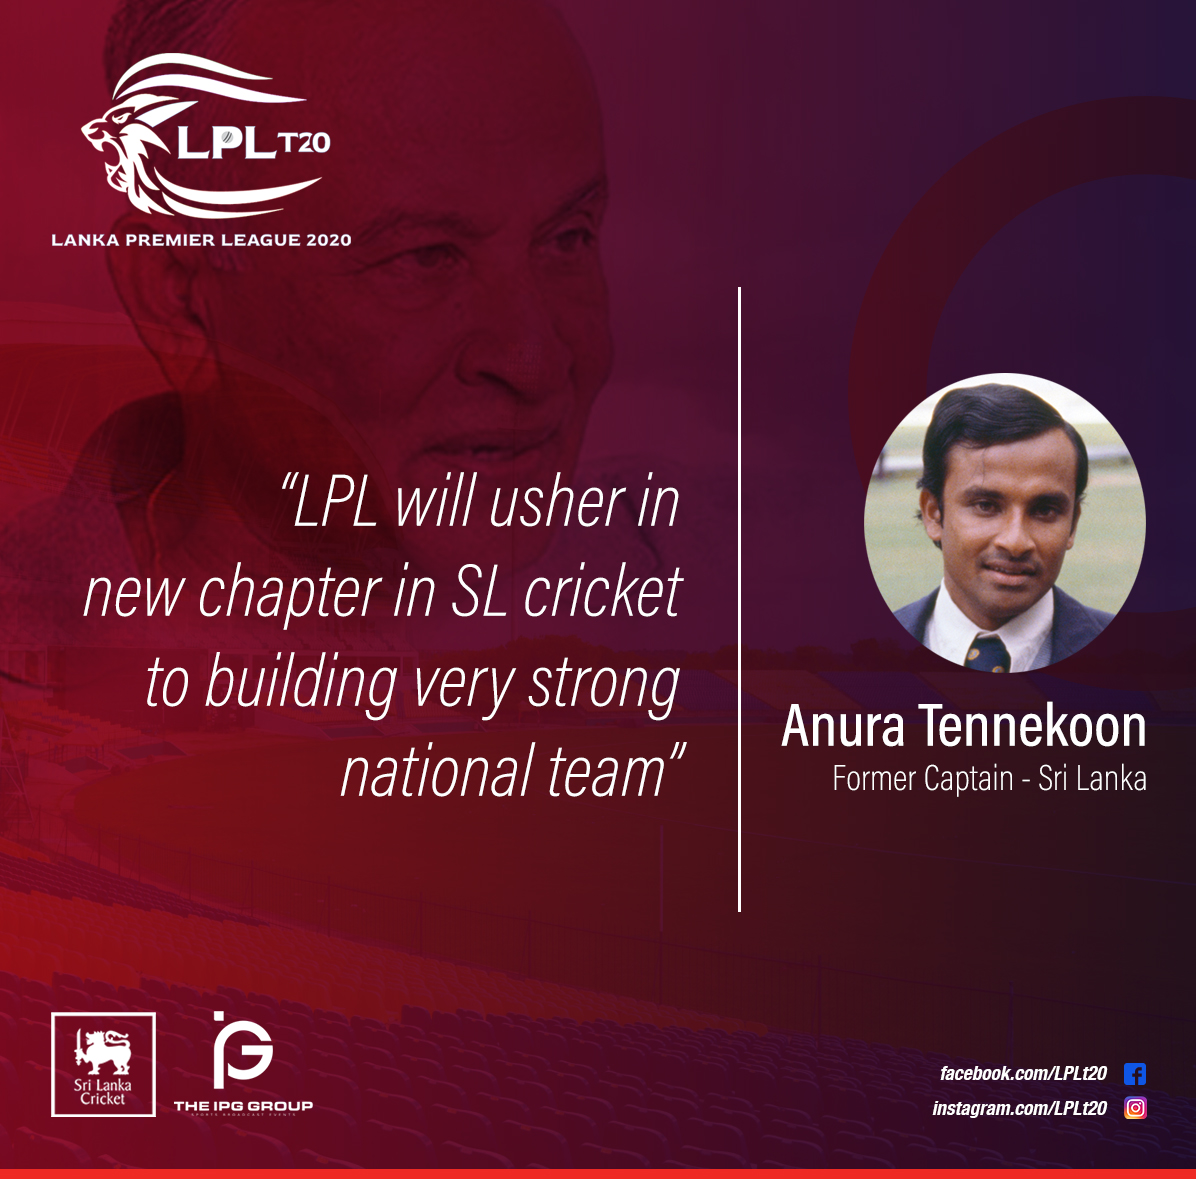 LPL will usher in new chapter in SL cricket to building very strong national team – Anura Tennekoon